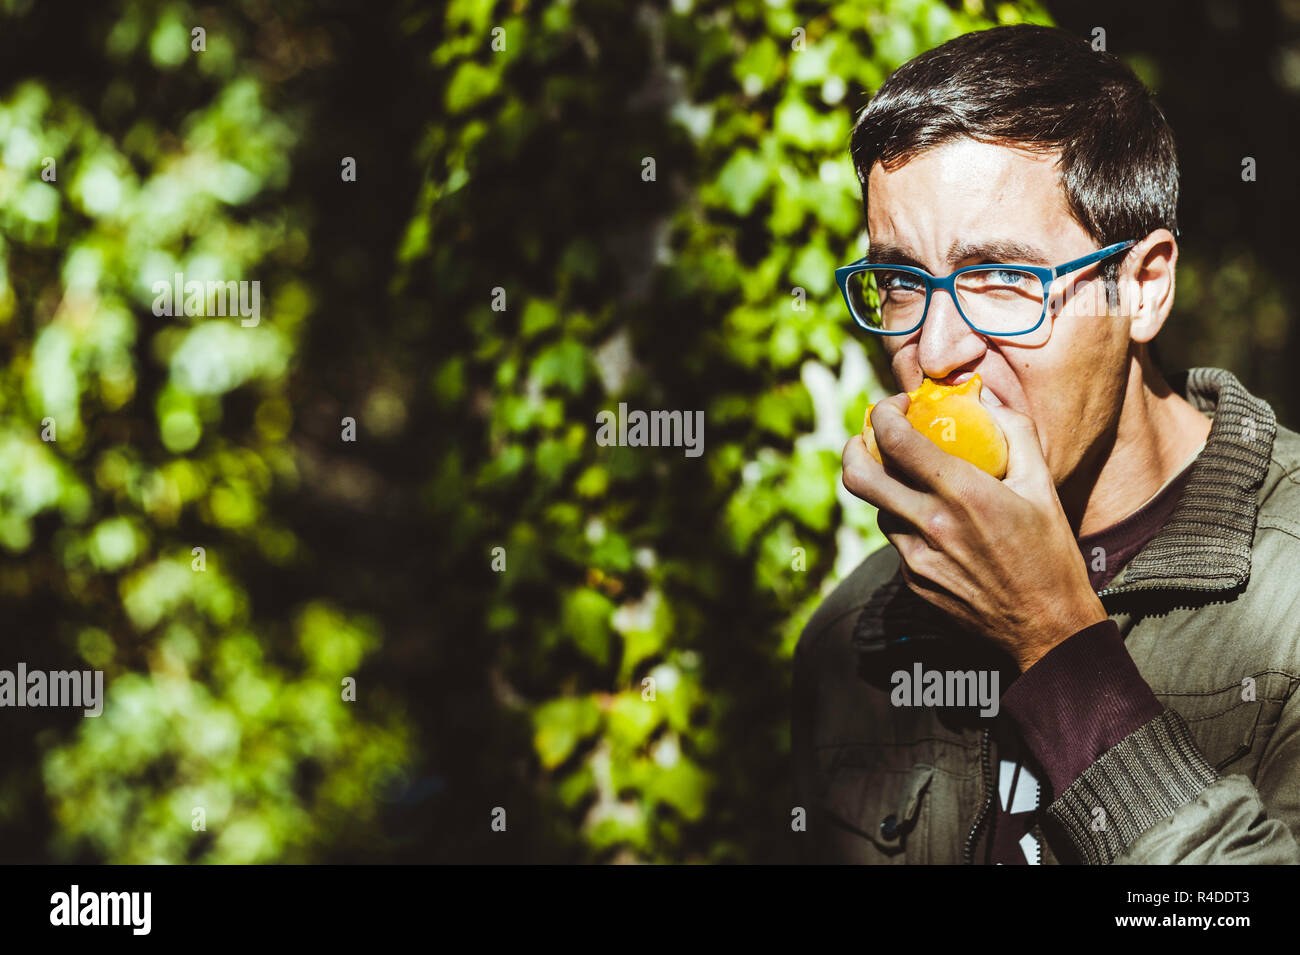 Young man with glasses and blue eyes biting a fruit, peach, with green leaves background Stock Photo